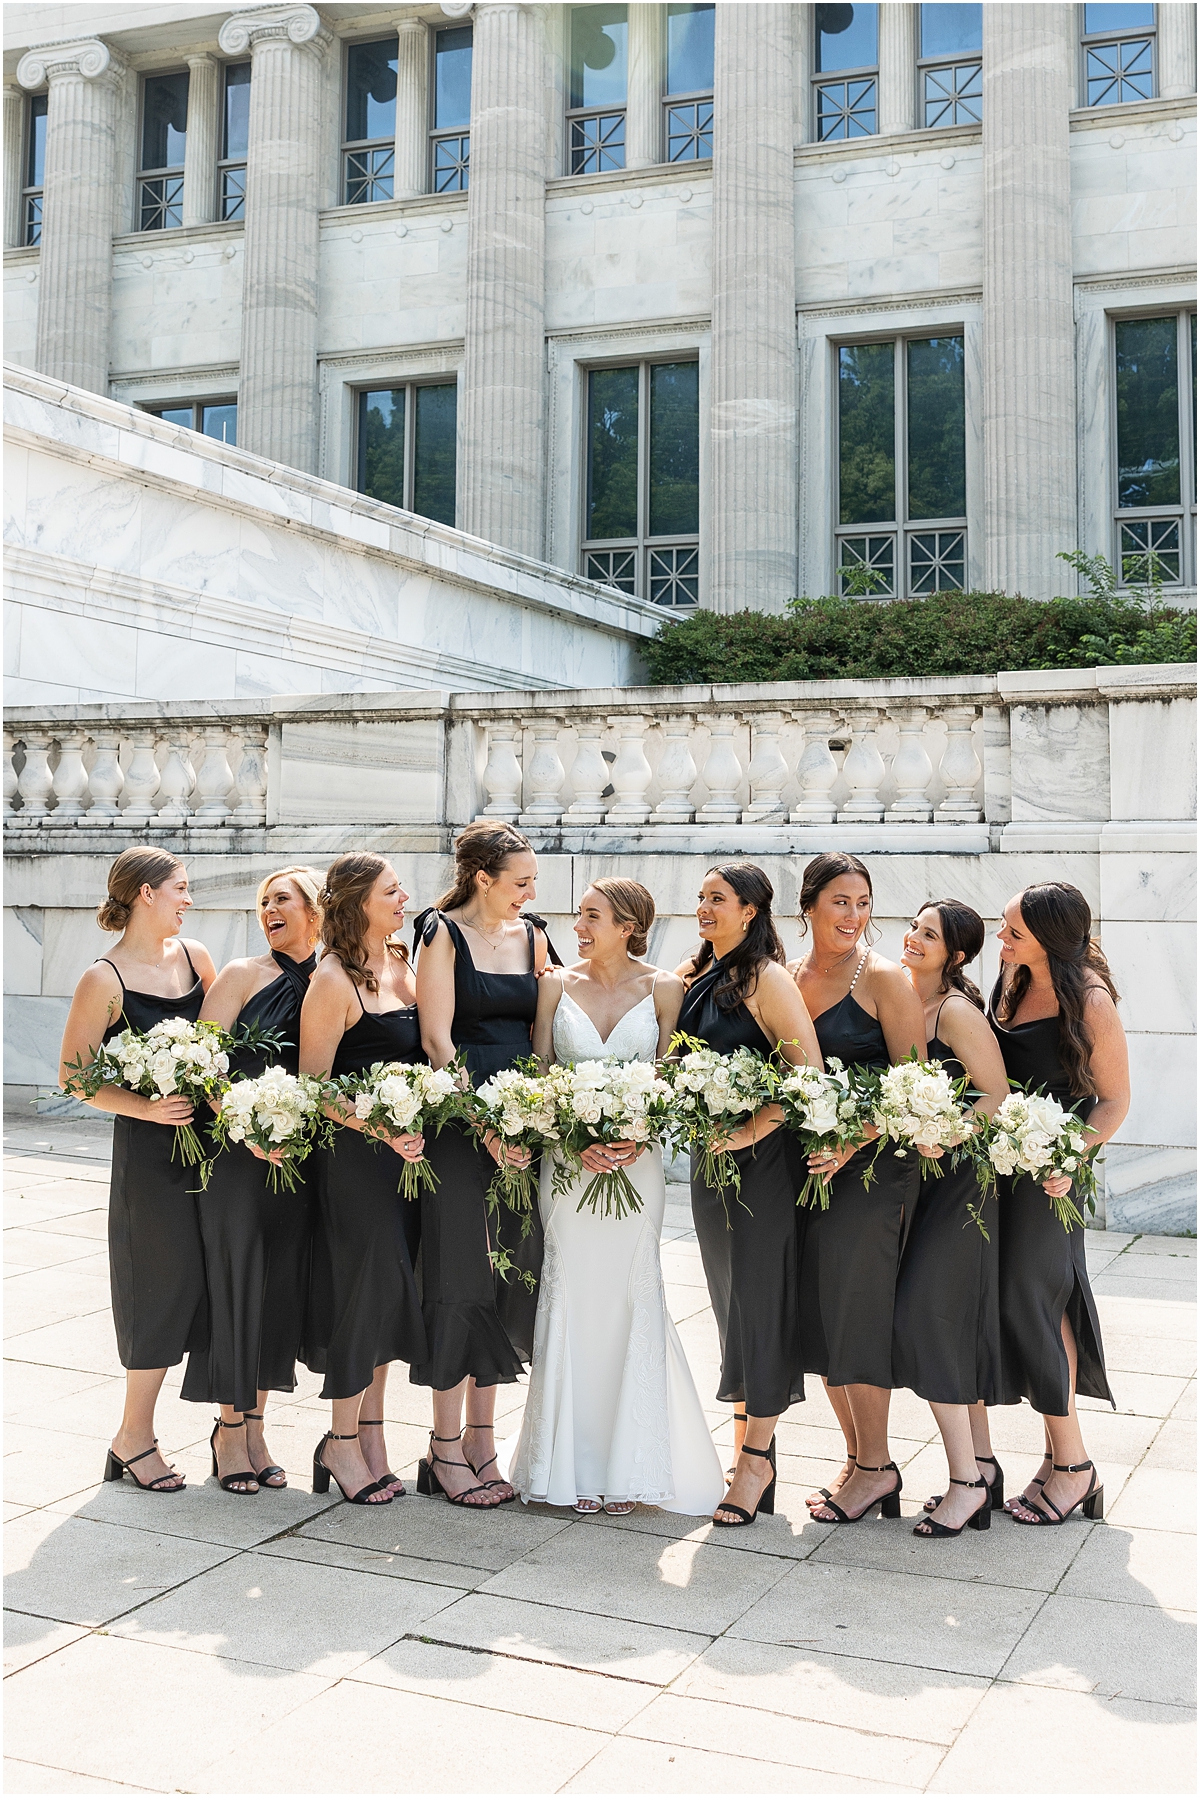 bride with bridesmaids in chic, black dresses